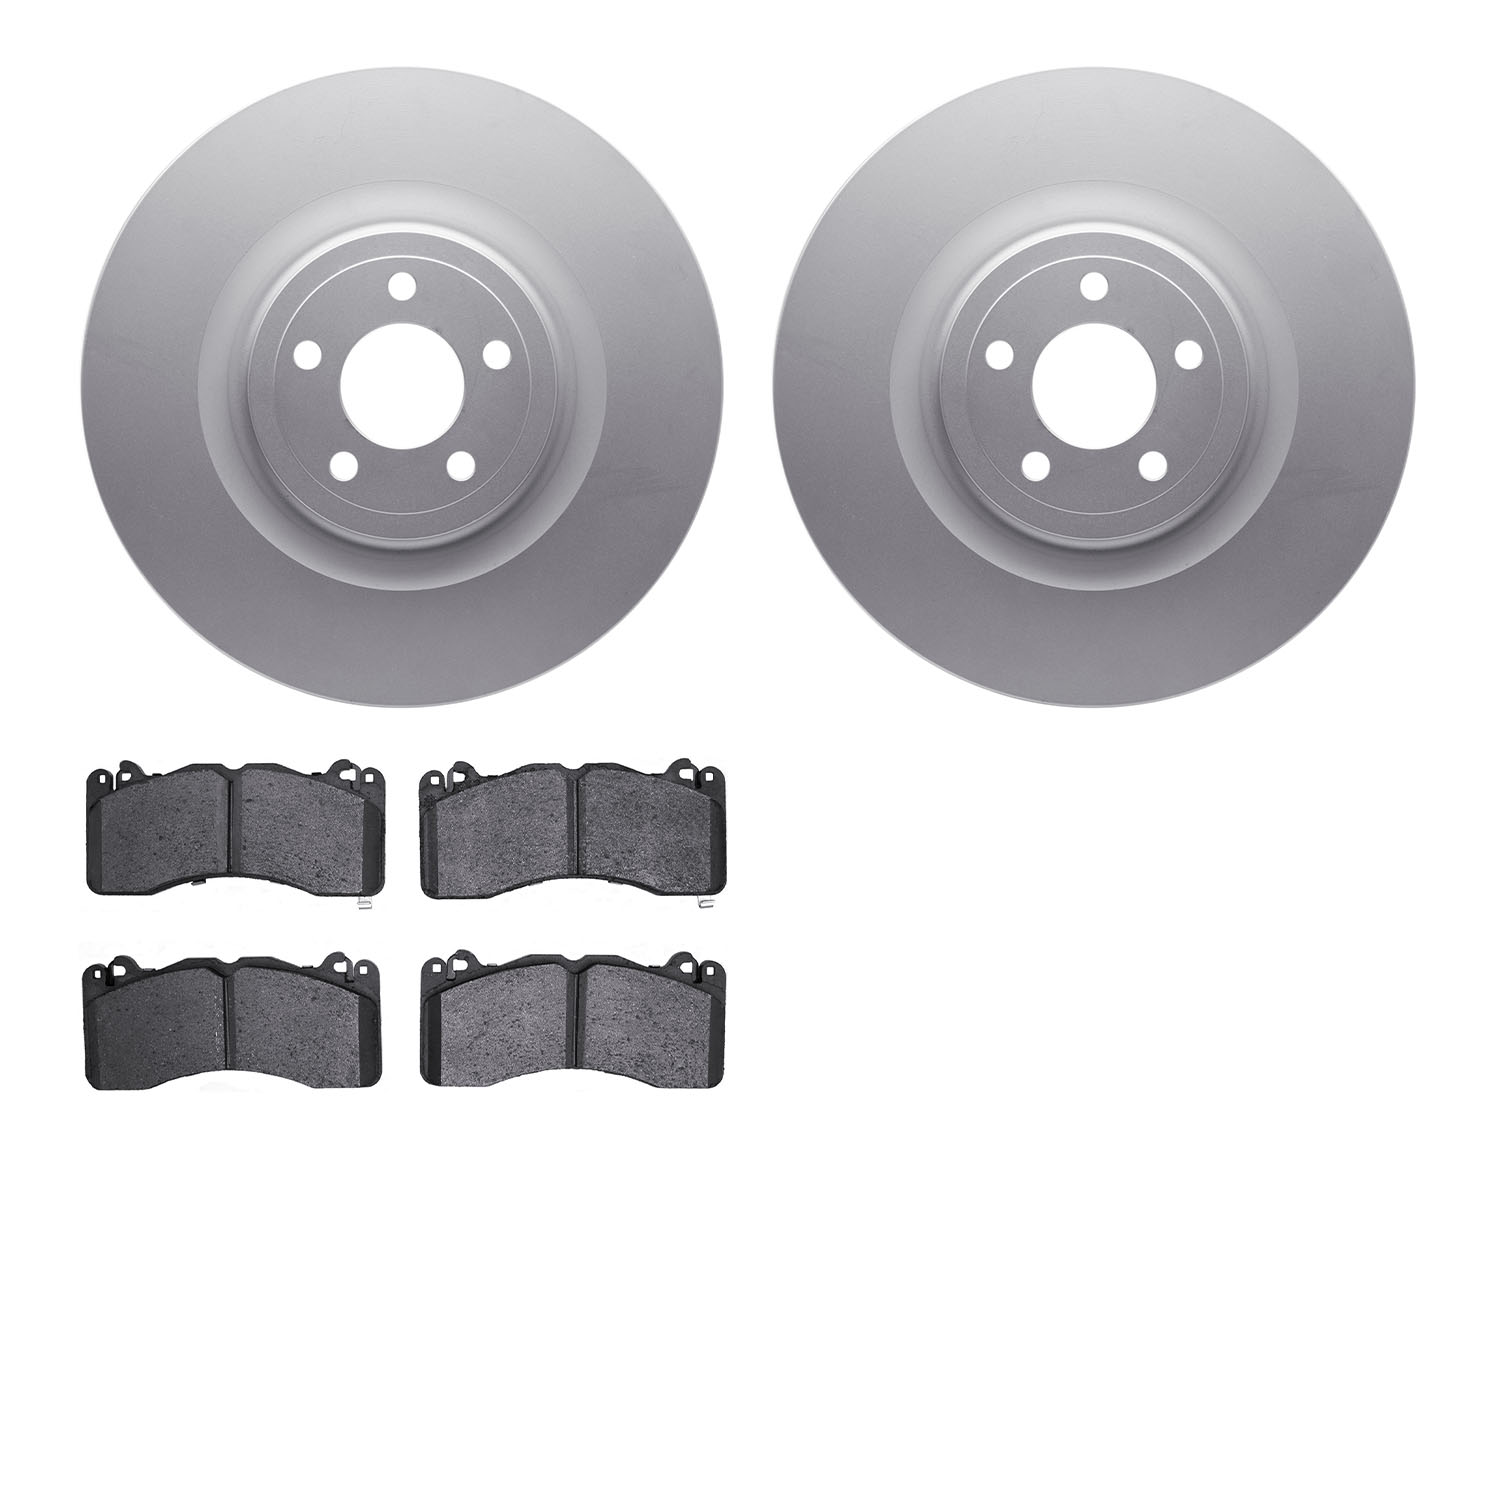 4502-99057 Geospec Brake Rotors w/5000 Advanced Brake Pads Kit, Fits Select Ford/Lincoln/Mercury/Mazda, Position: Front